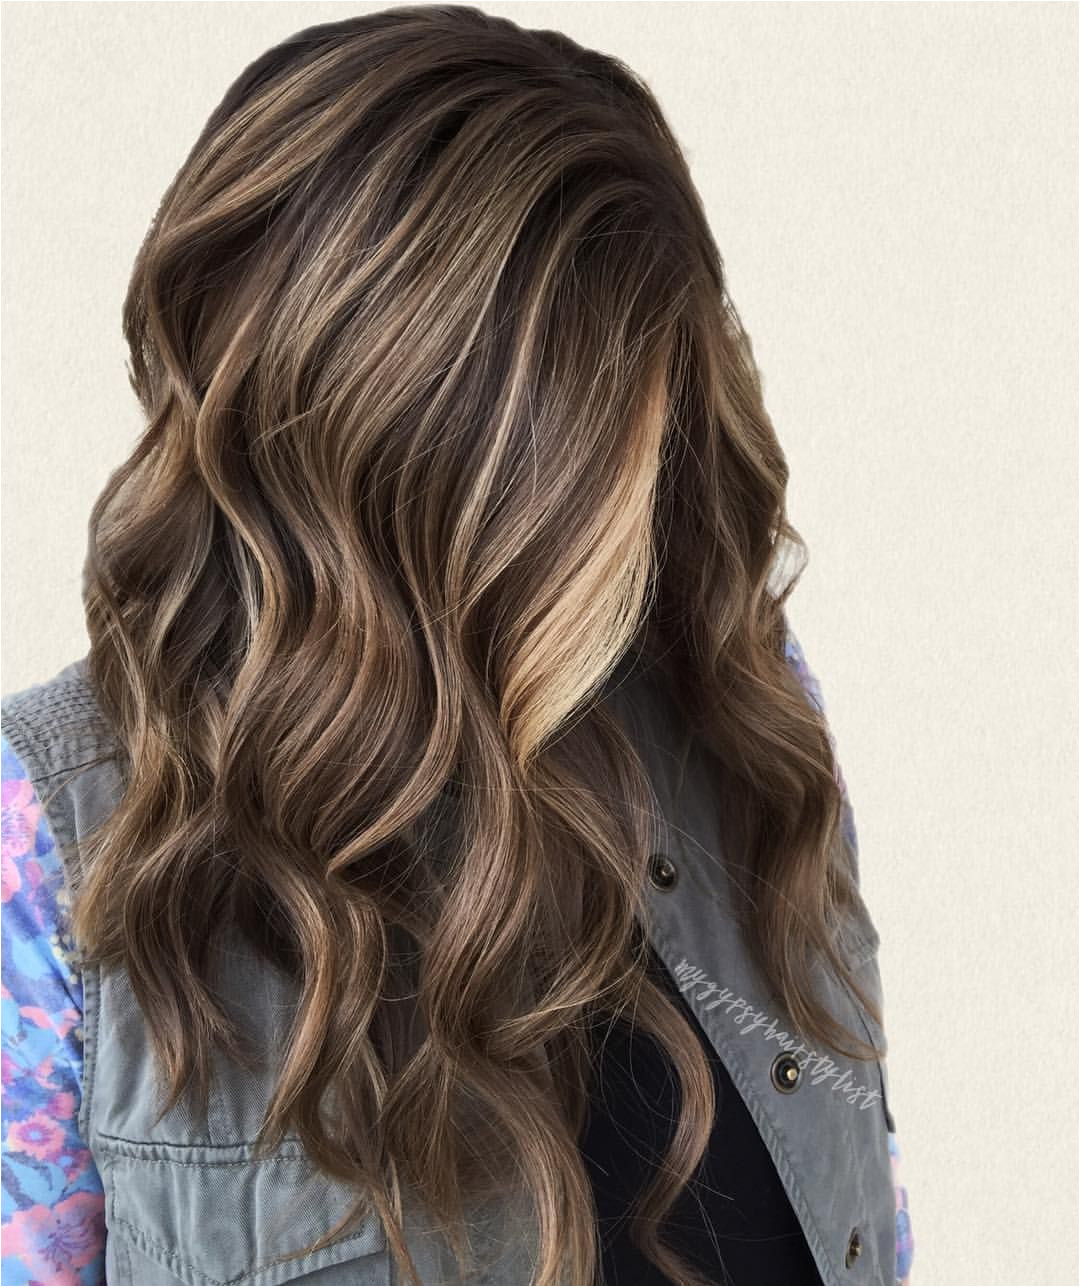 Balayage brunette lived in hair color natural hair color beach waves pretty hair INSTAGRAM mygypsyhairstylist